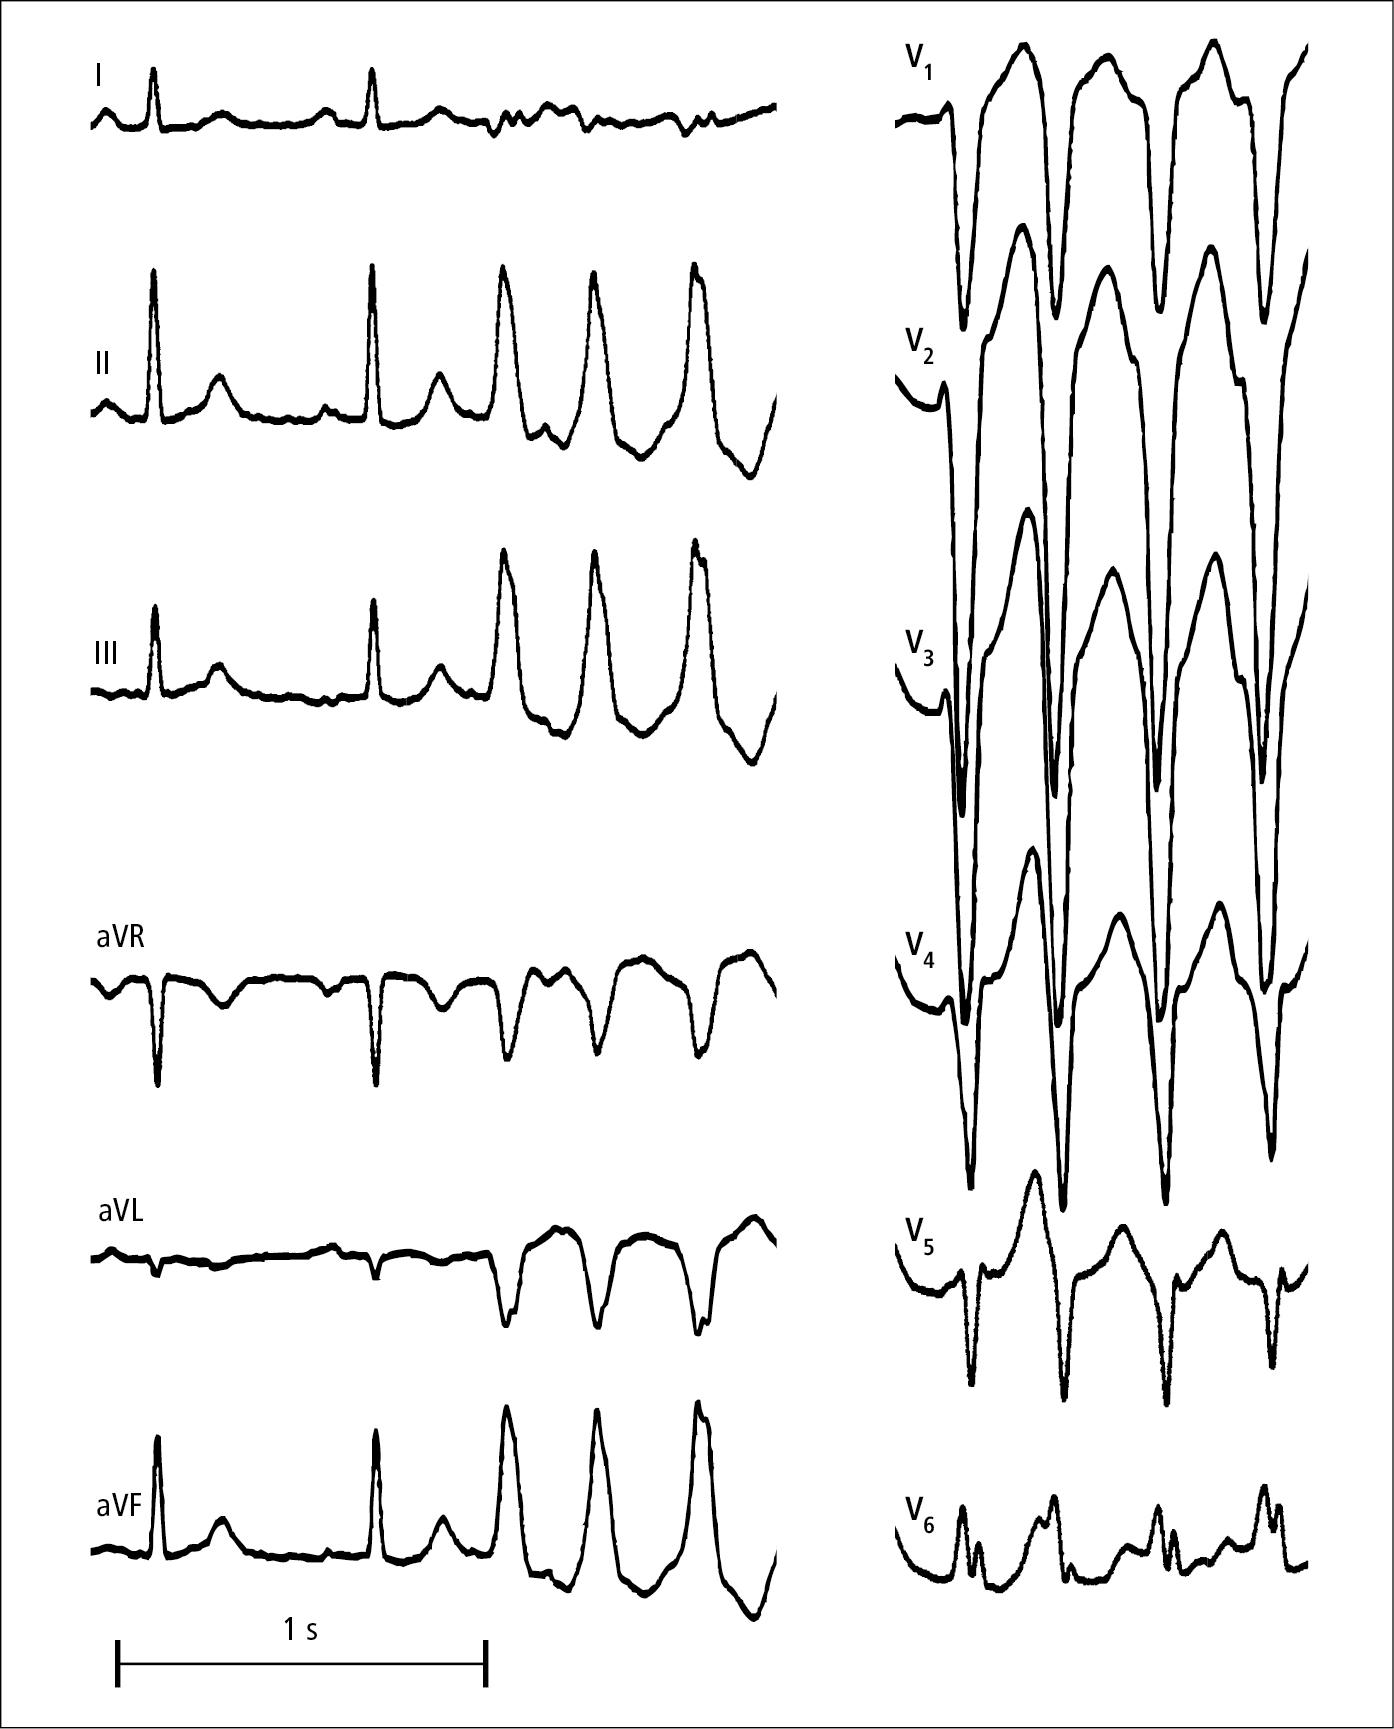 Figure 031_9760.  Episode of monomorphic right ventricular outflow tract tachycardia. 